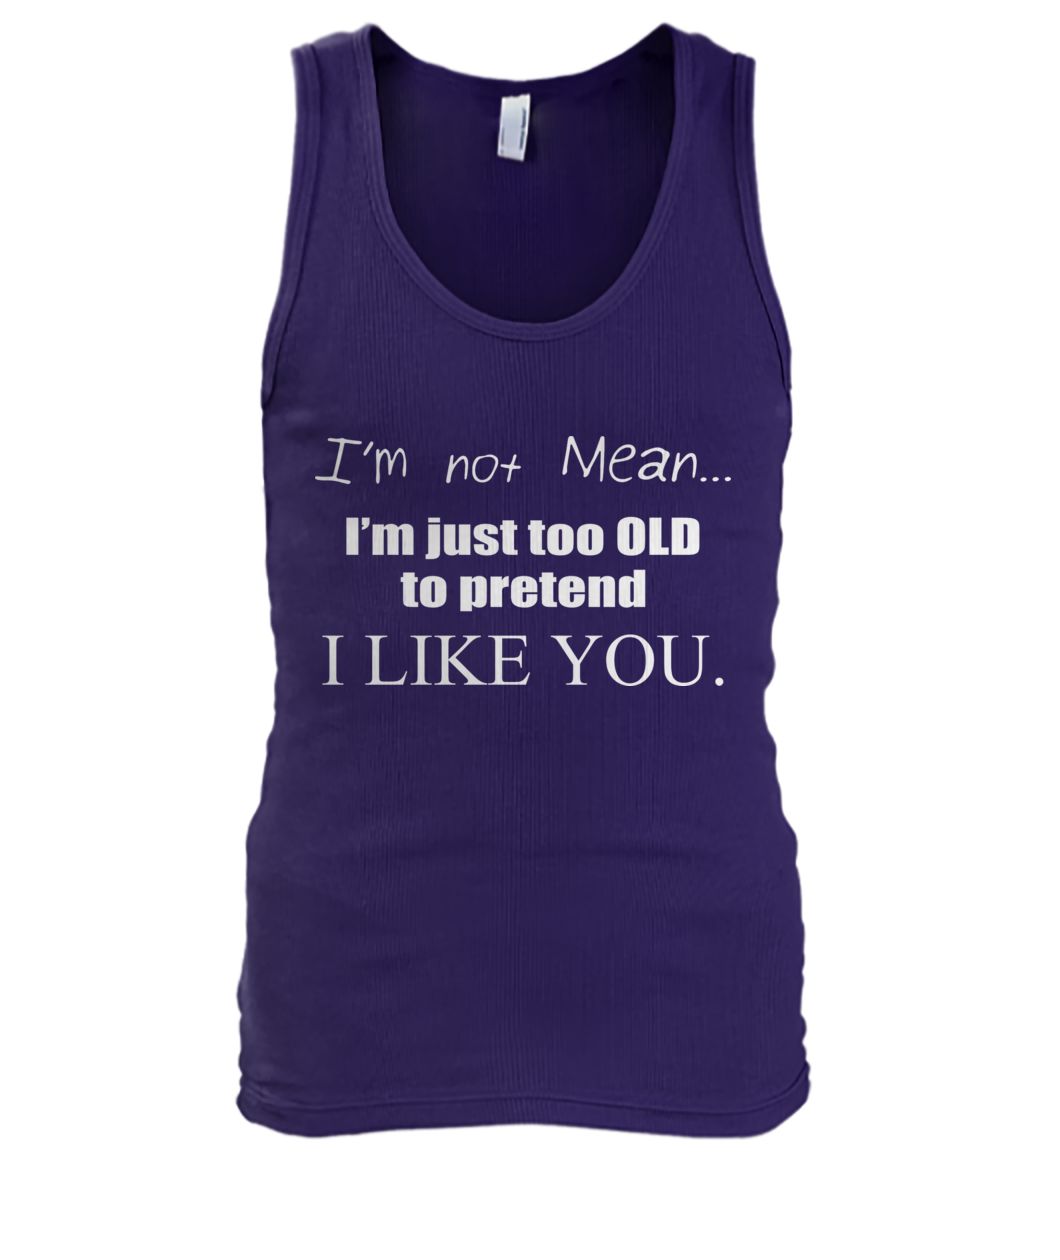 I'm not mean I'm just too old to pretend I like you men's tank top